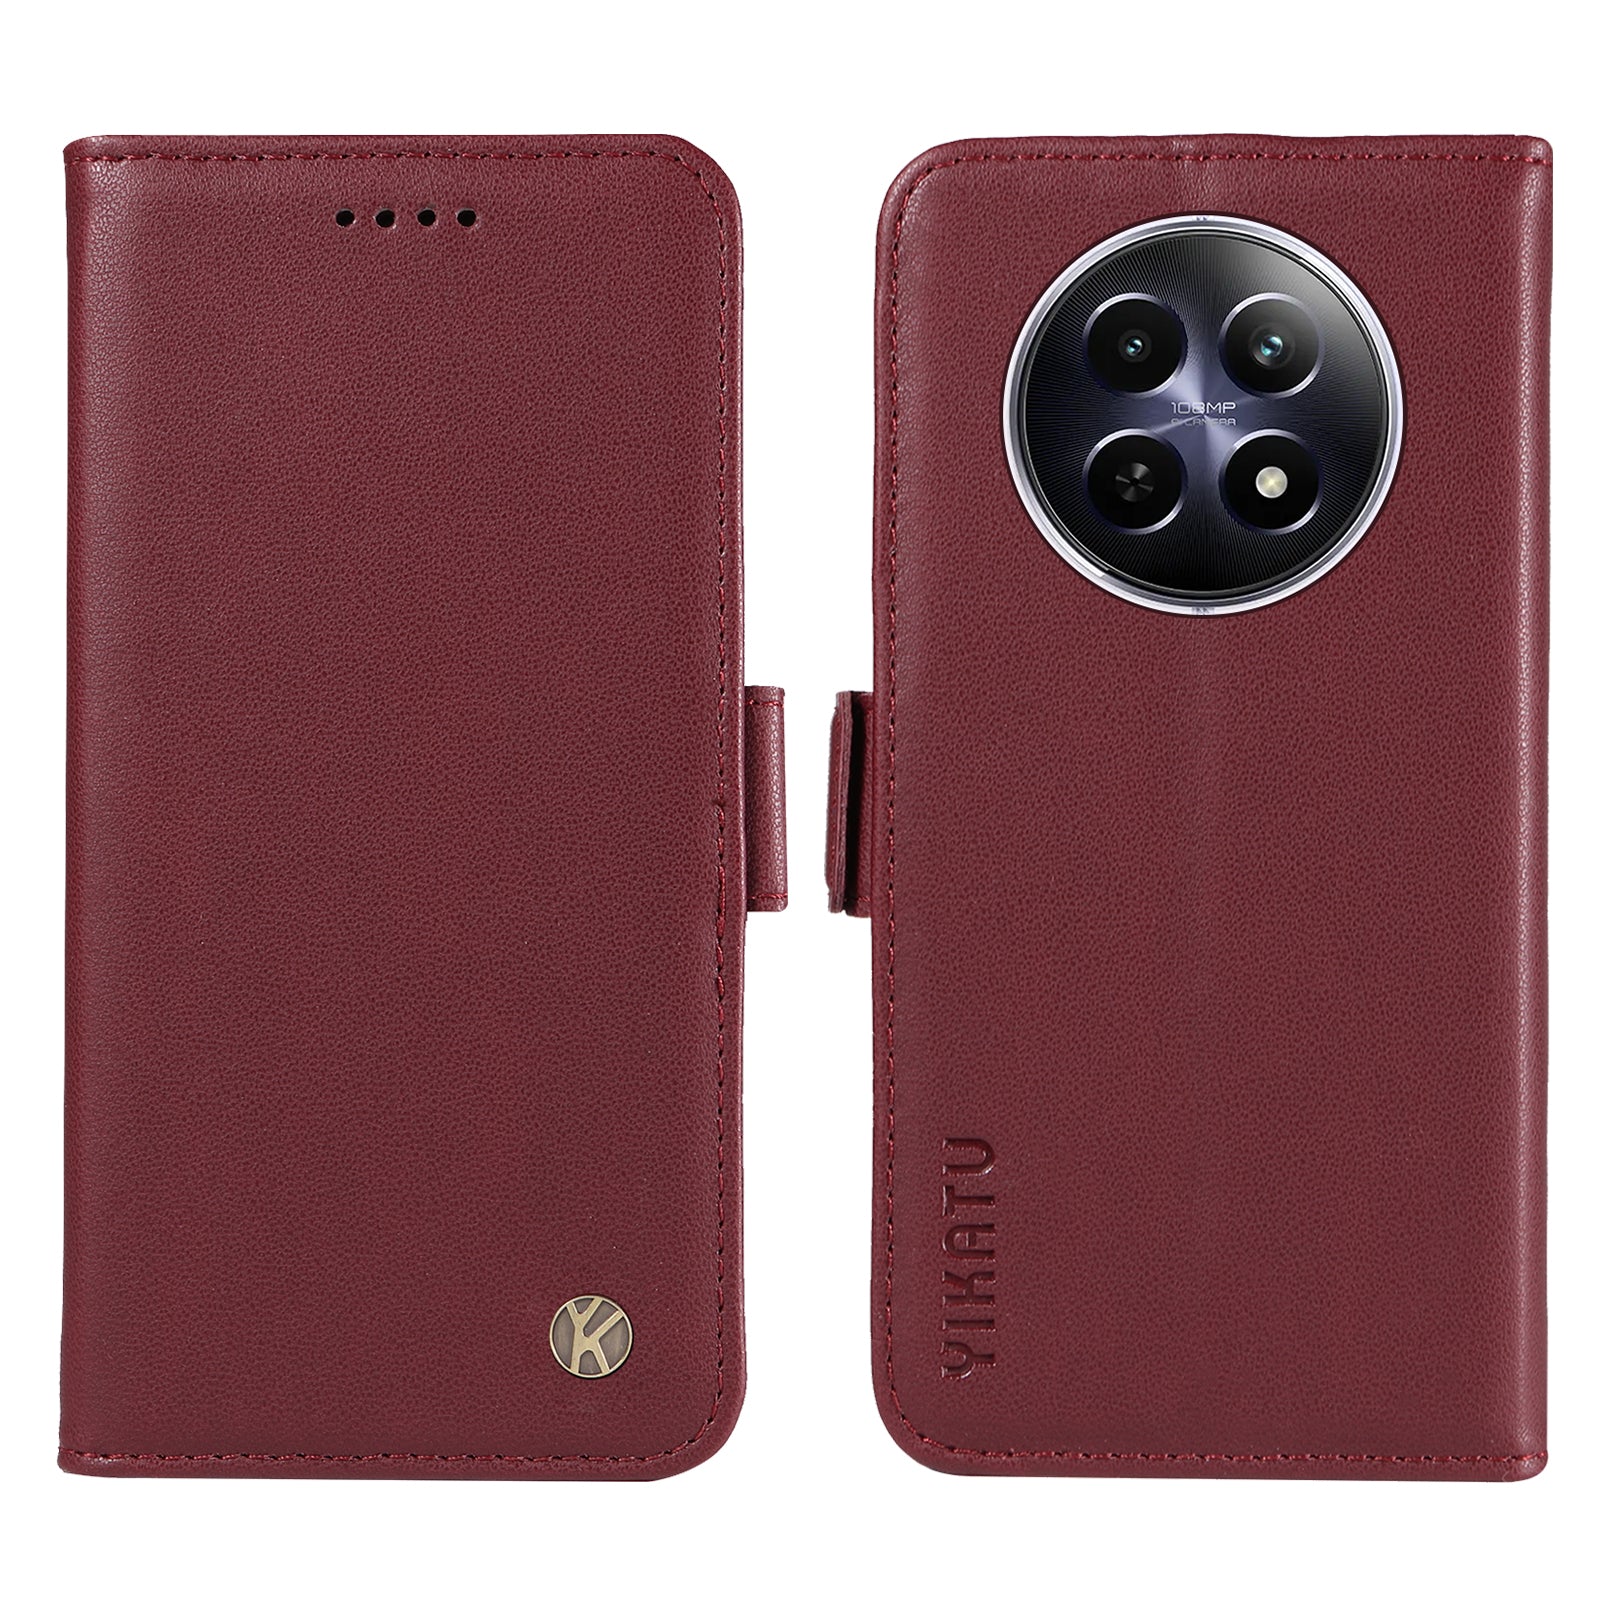 YIKATU YK-003 For Realme 12 Leather Case Wallet Cover Phone Accessories Distributors - Wine Red